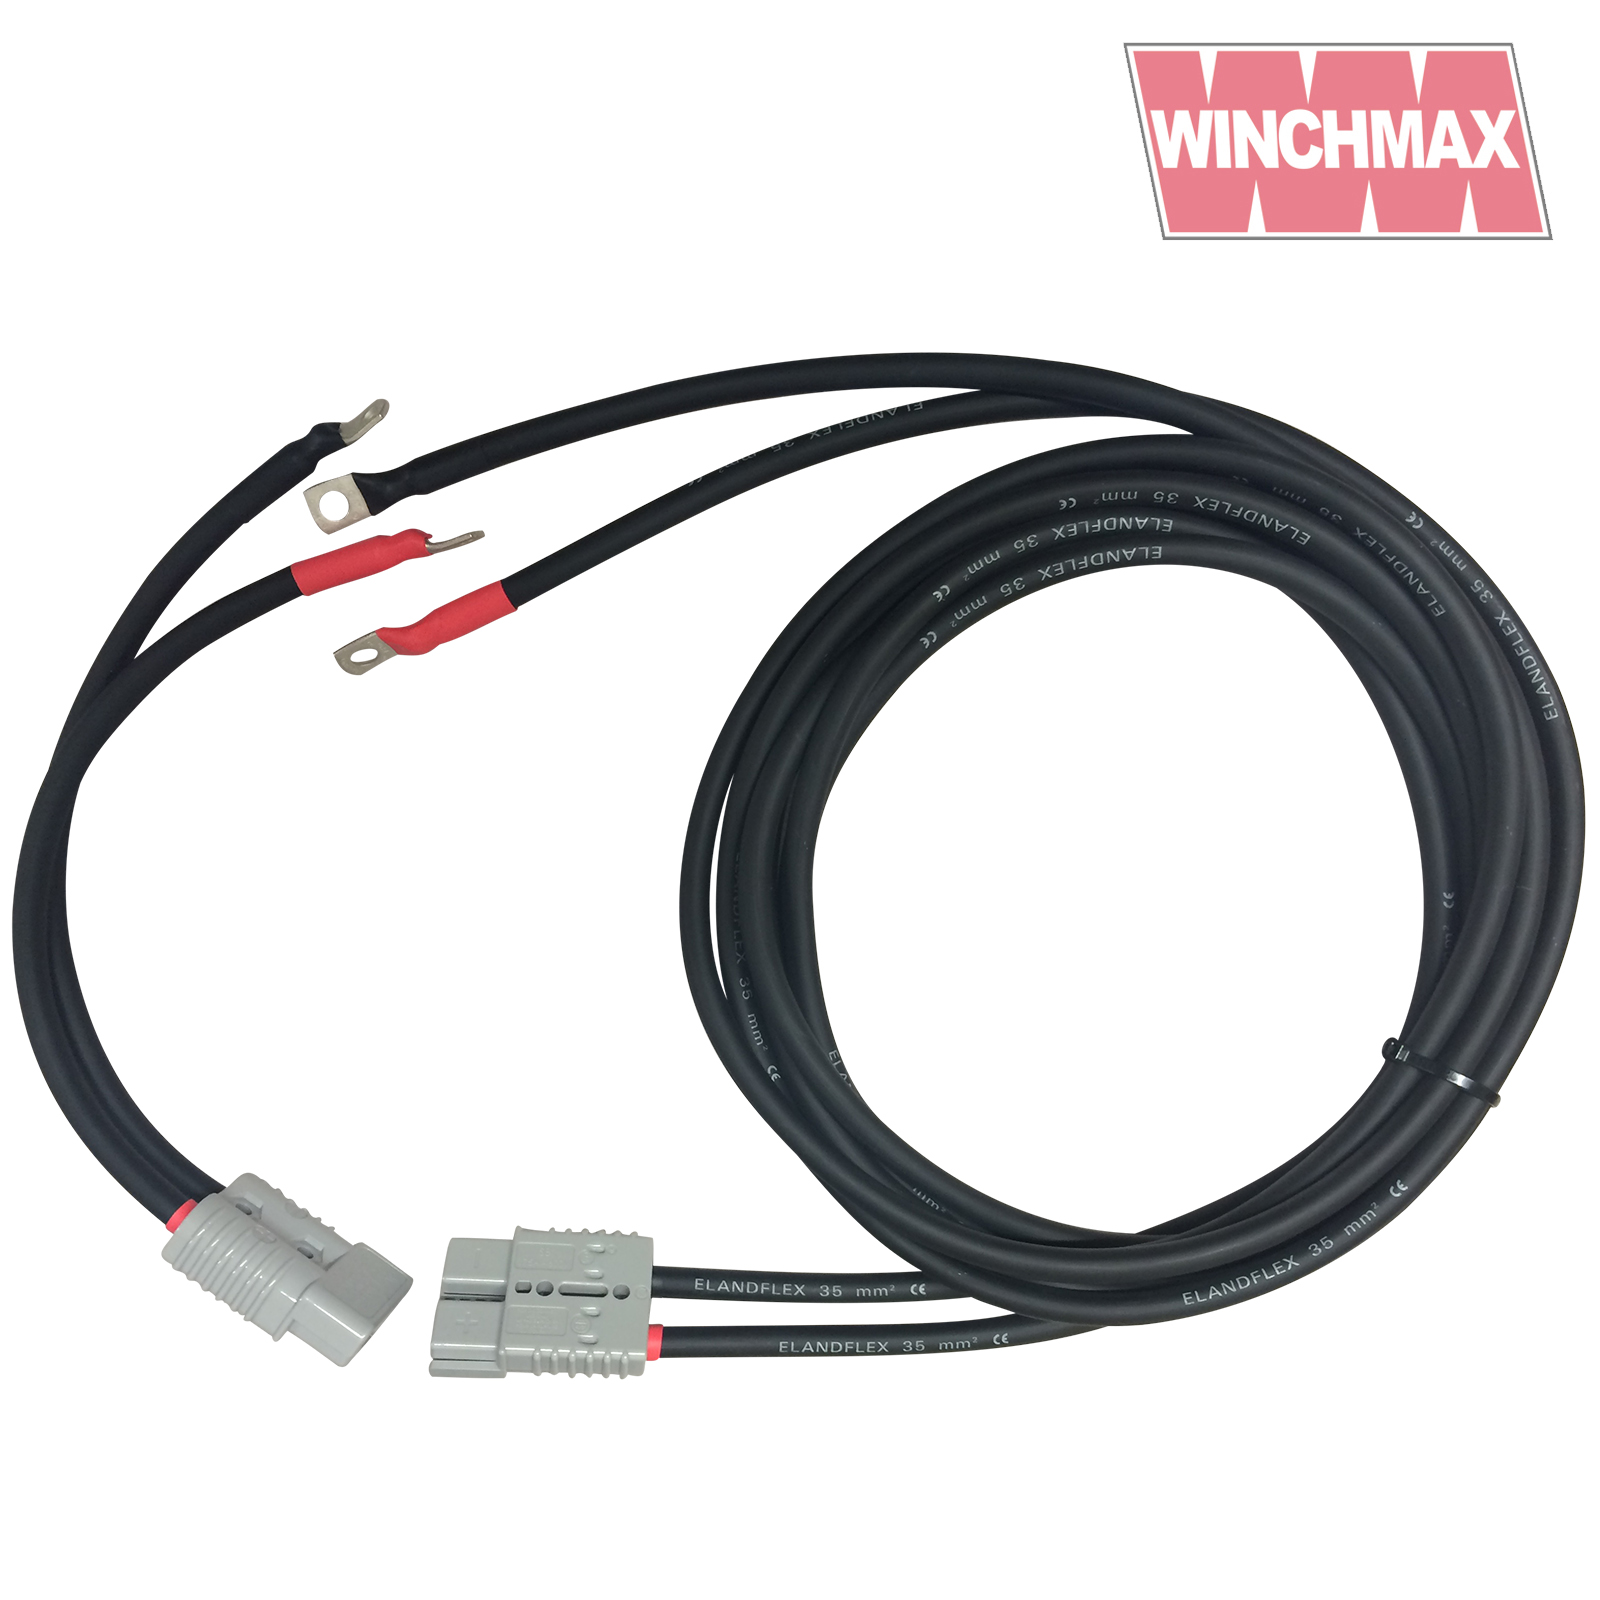 WINCHMAX Winch Battery Extension Cables. 4m x 35mm